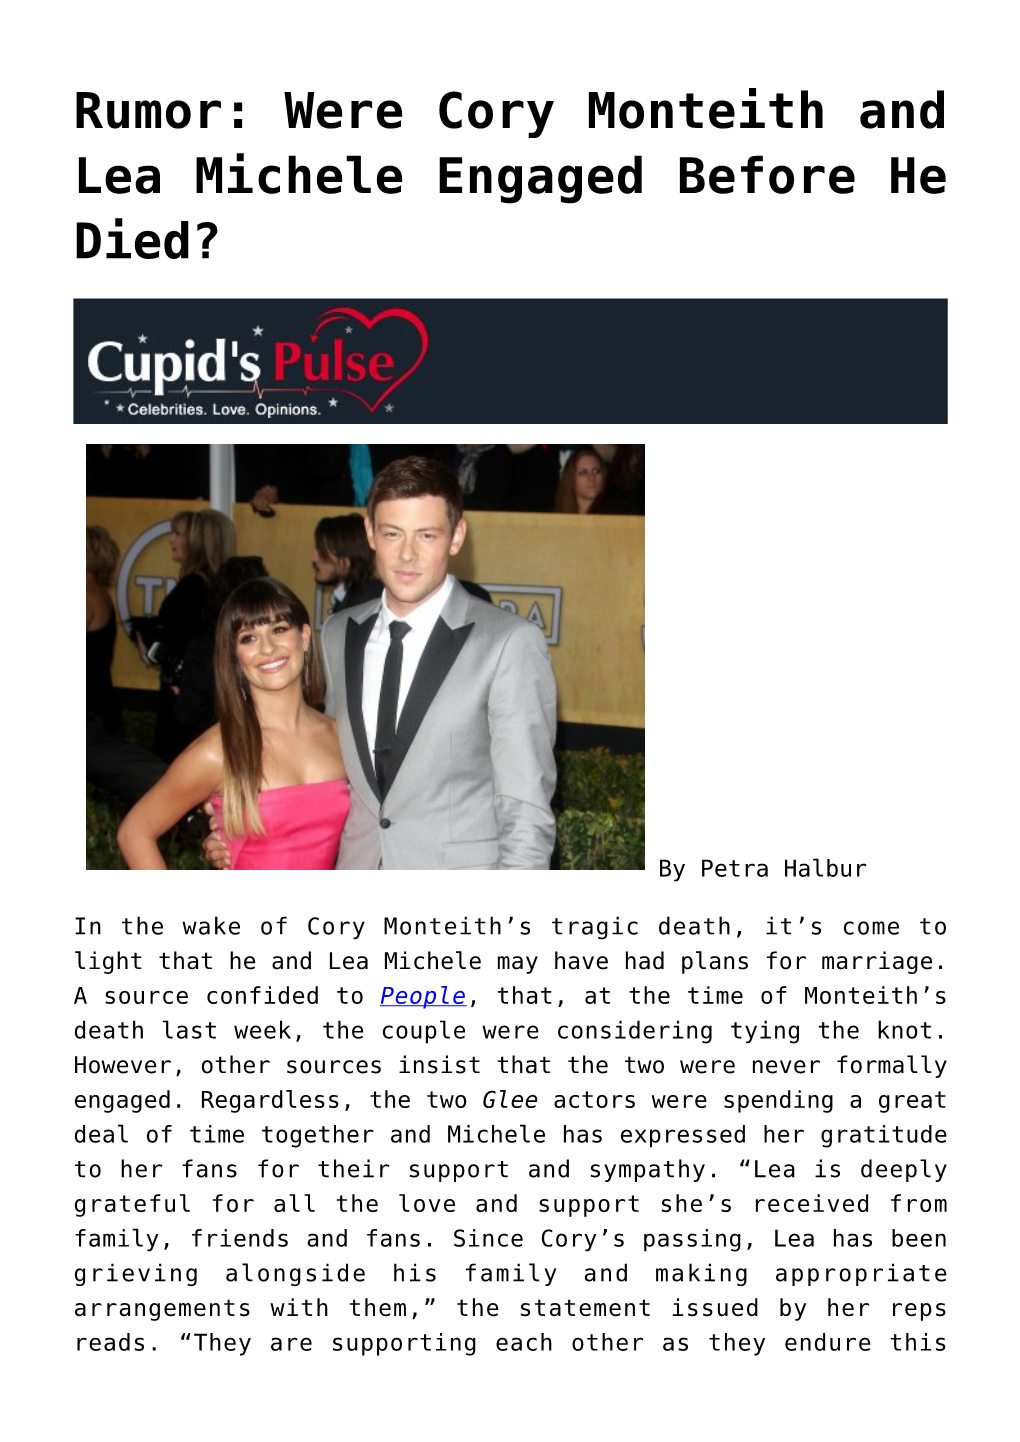 Were Cory Monteith and Lea Michele Engaged Before He Died?